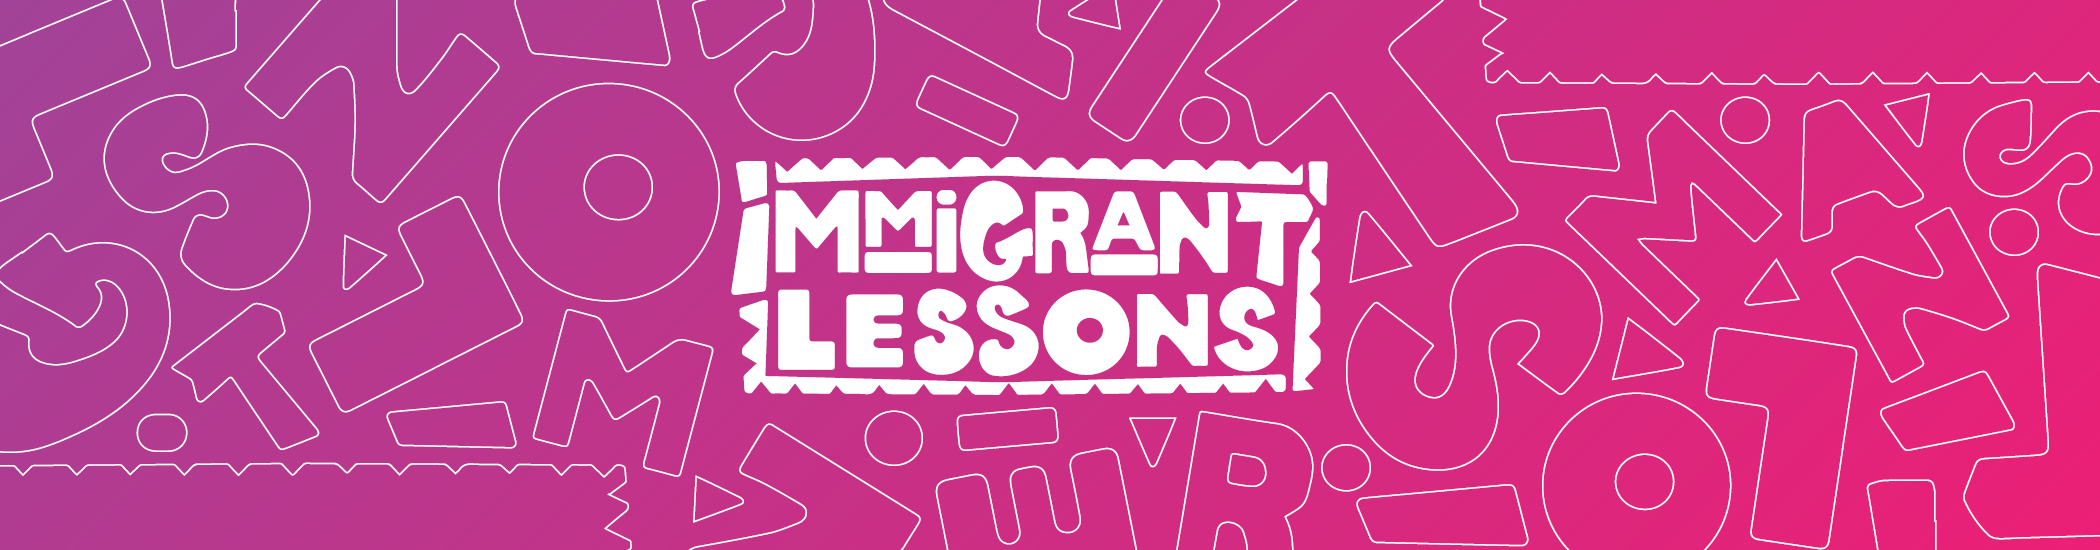 White hand-drawn block letters read Immigrant Lessons on a purple-red gradient background filled with letter outlines.